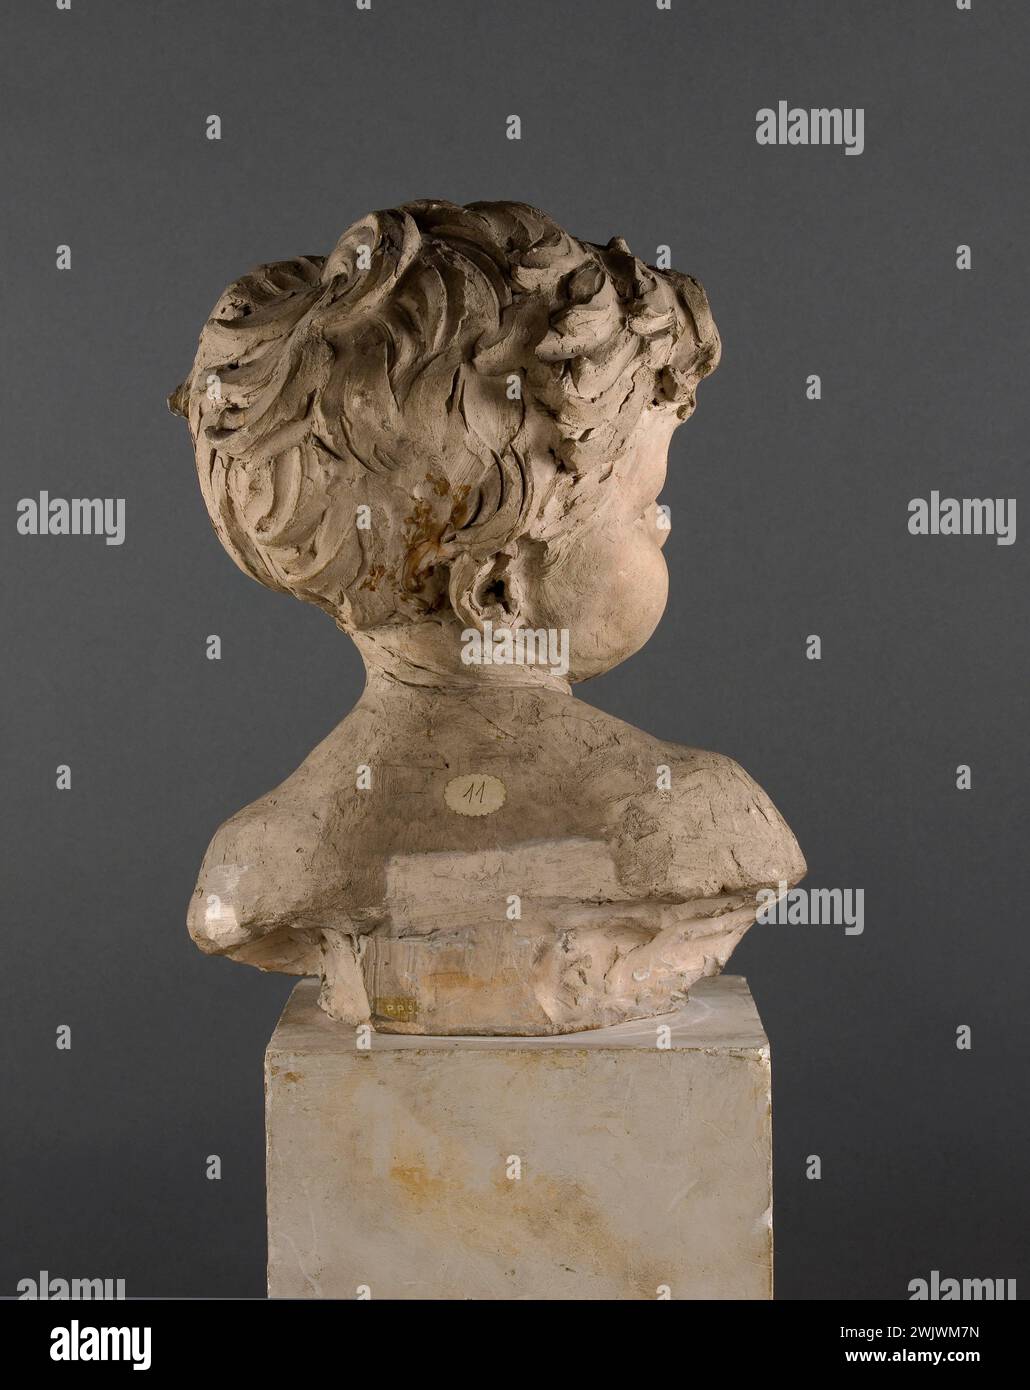 Aimé-Jules Dalou (1838-1902). 'Bust of children'. Terracotta, between 1875 and 1890. Museum of Fine Arts of the city of Paris, Petit Palais. 11, bust, child, inventory, numbers, terracotta, touted head, back view Stock Photo